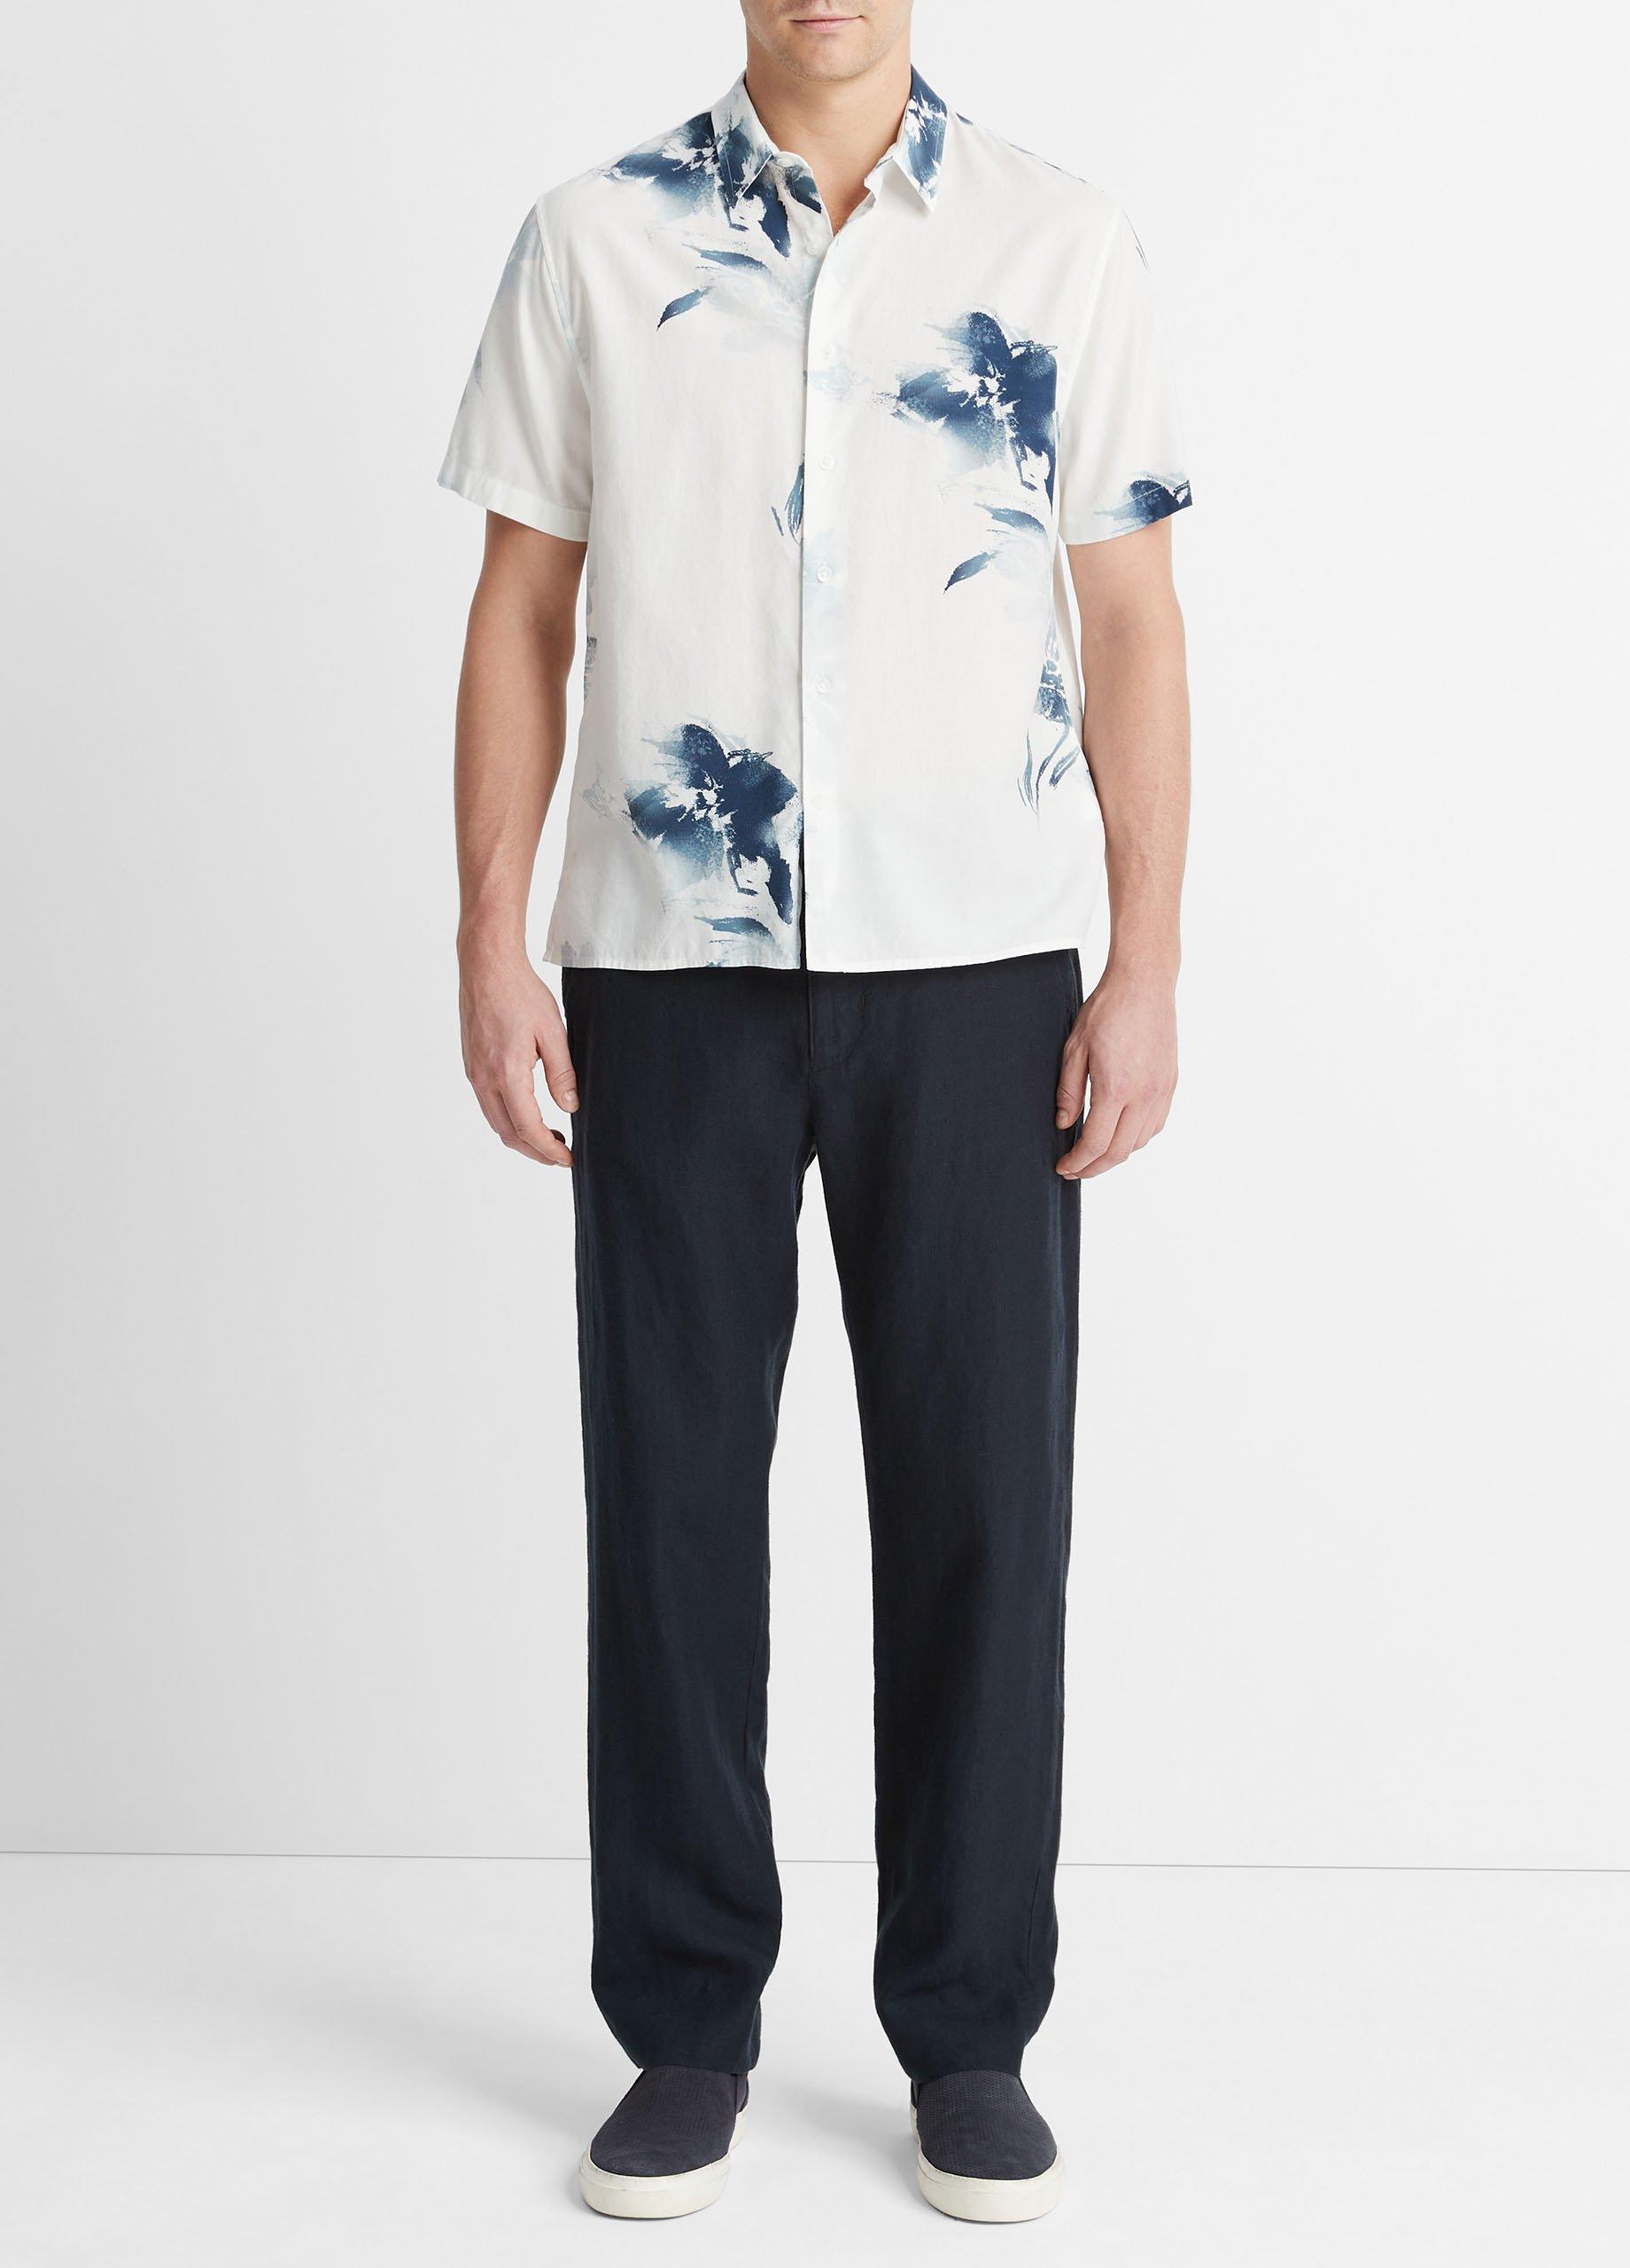 Faded Floral Short-Sleeve Shirt in Short Sleeve | Vince